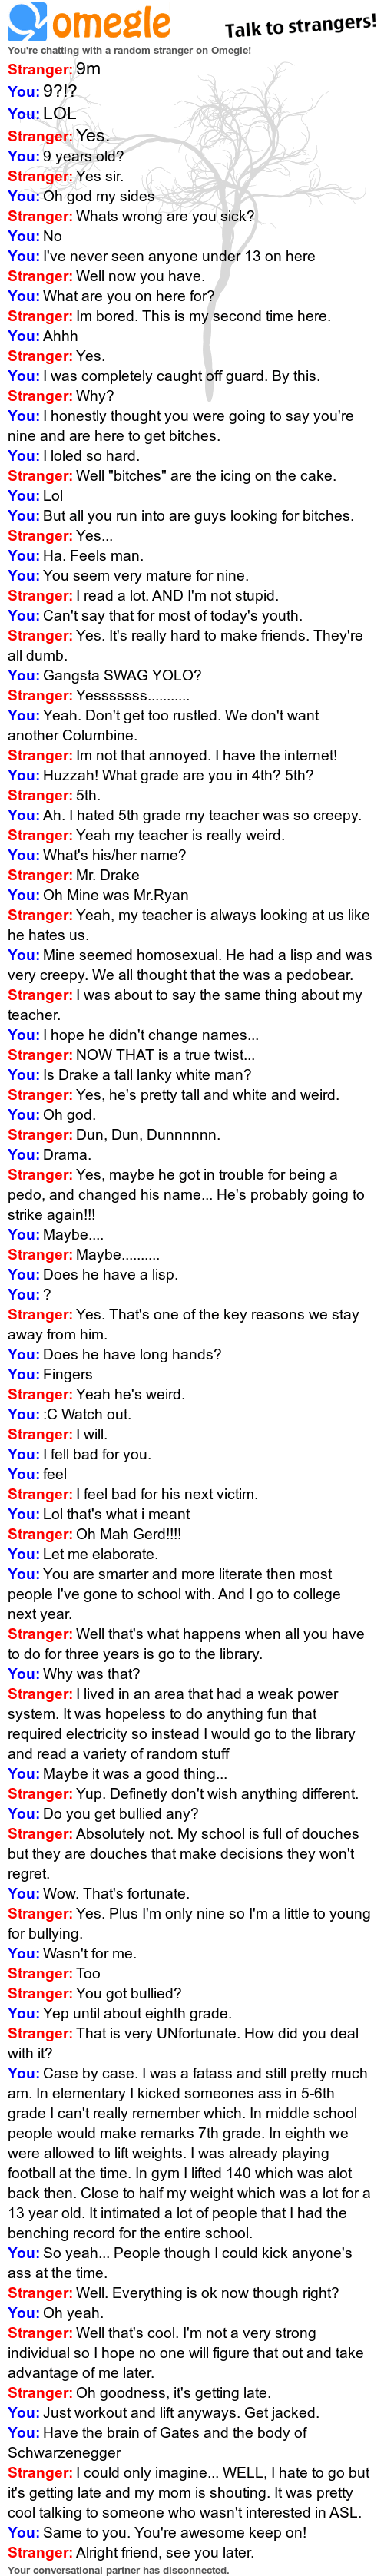 omegle hebe@@@@Camkittys hebe a^^